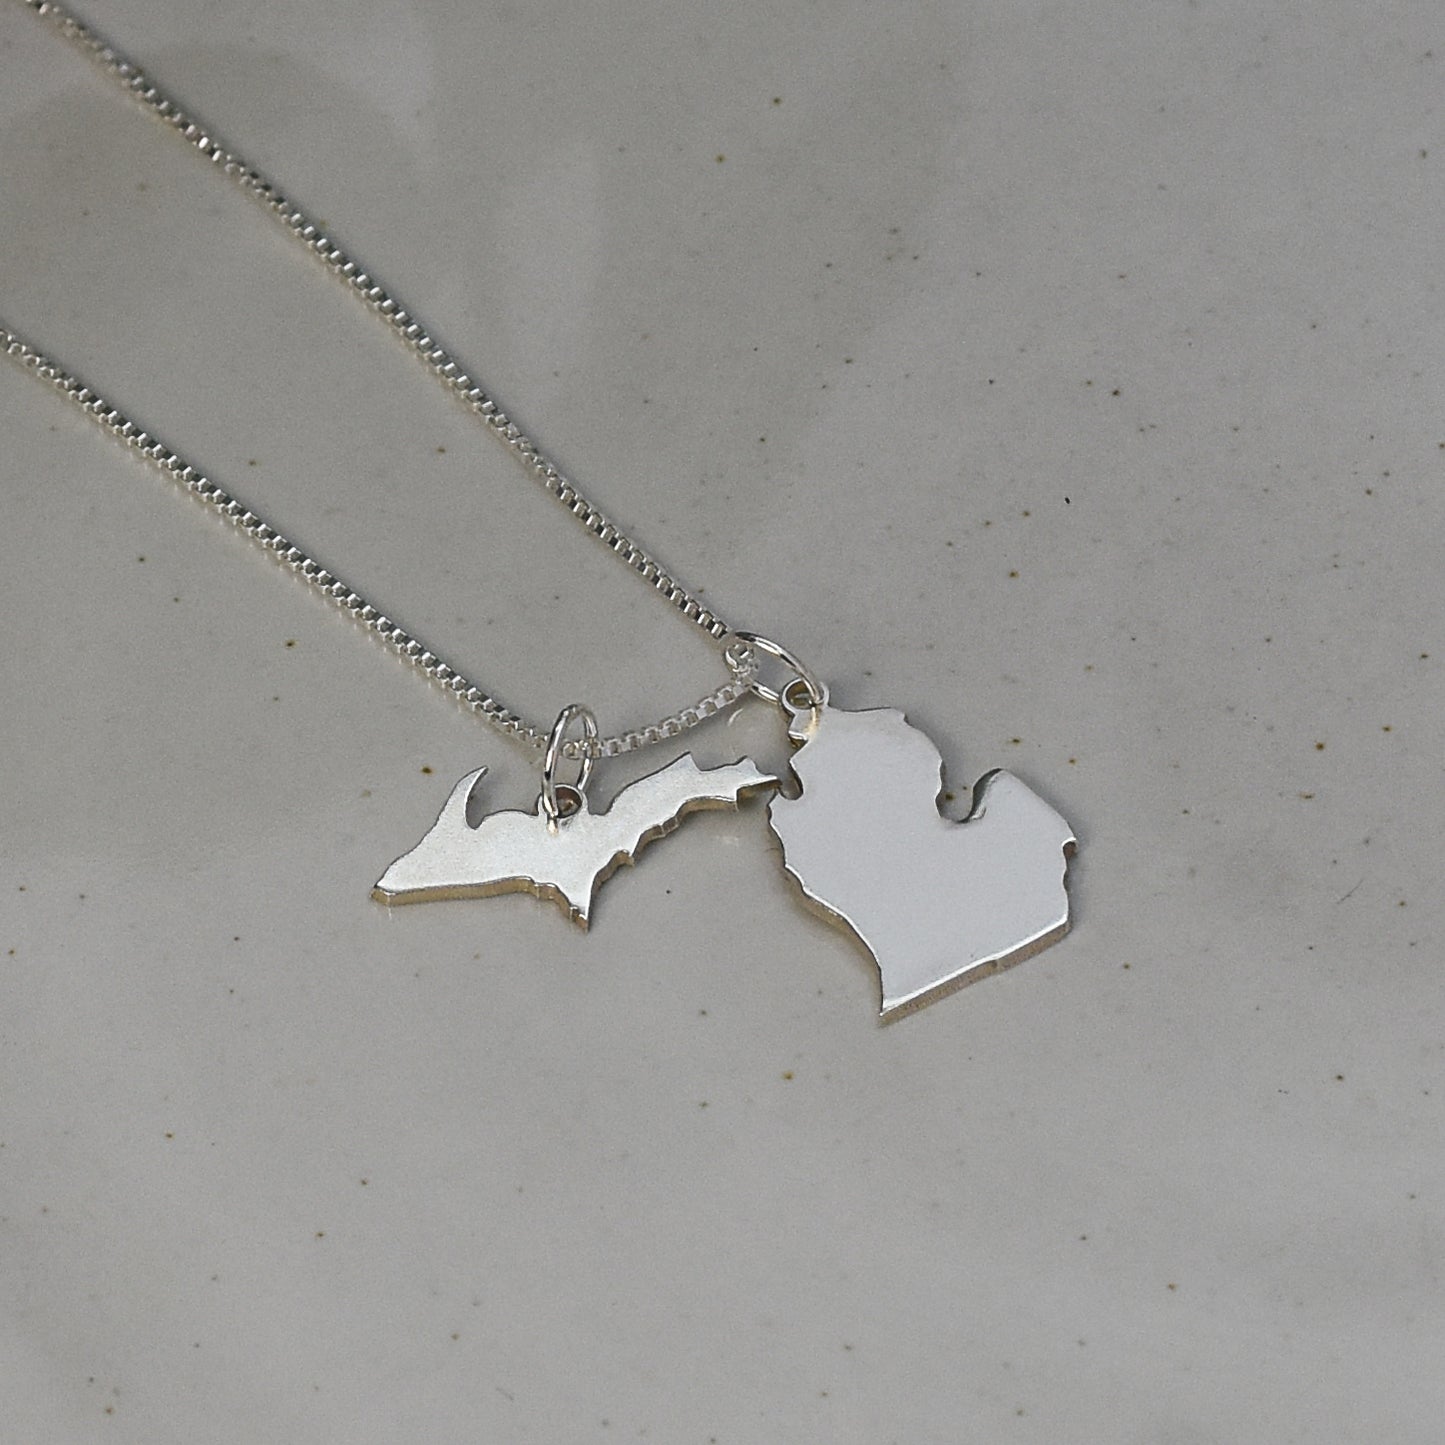 2 charm upper and lower peninsula charm necklace in sterling silver